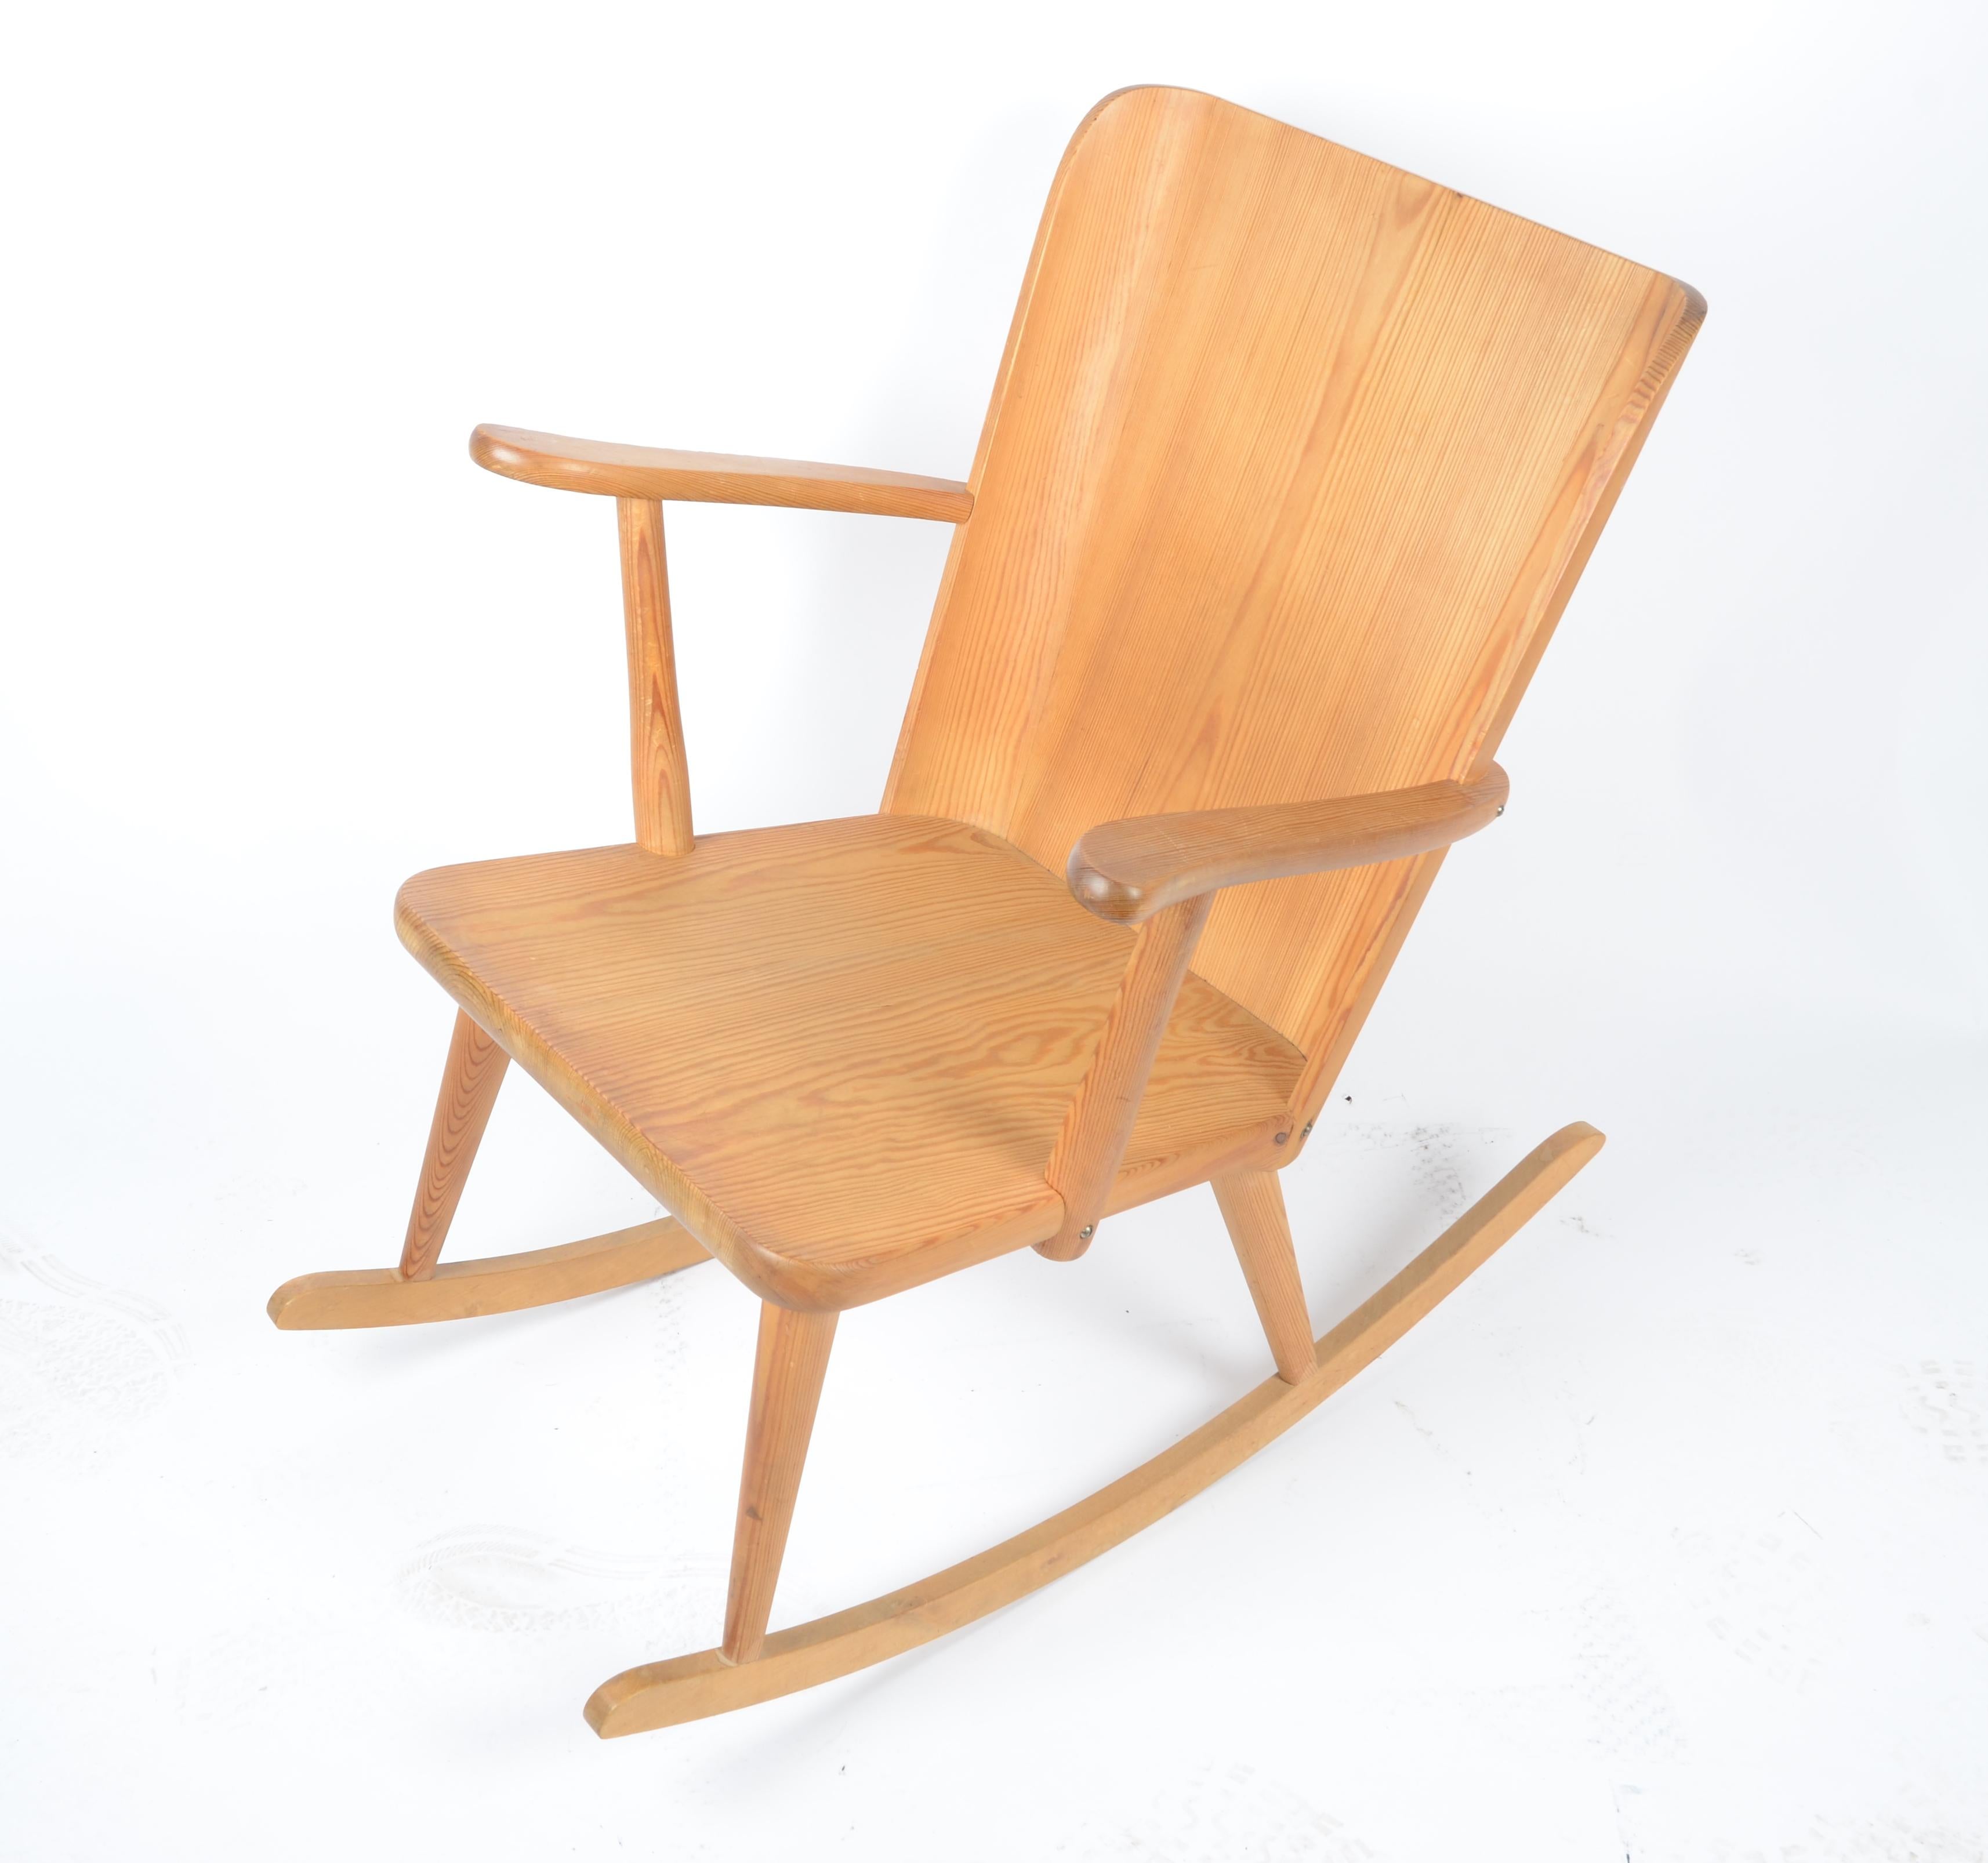 Rocking chair designed by Göran Malmvall, Svensk fur/Swedish pine for Karl Andersson & Söner. Made in the 1940s. 

Thus style of pine furniture were designed for swedish cabins and country homes during the mid-1900s.